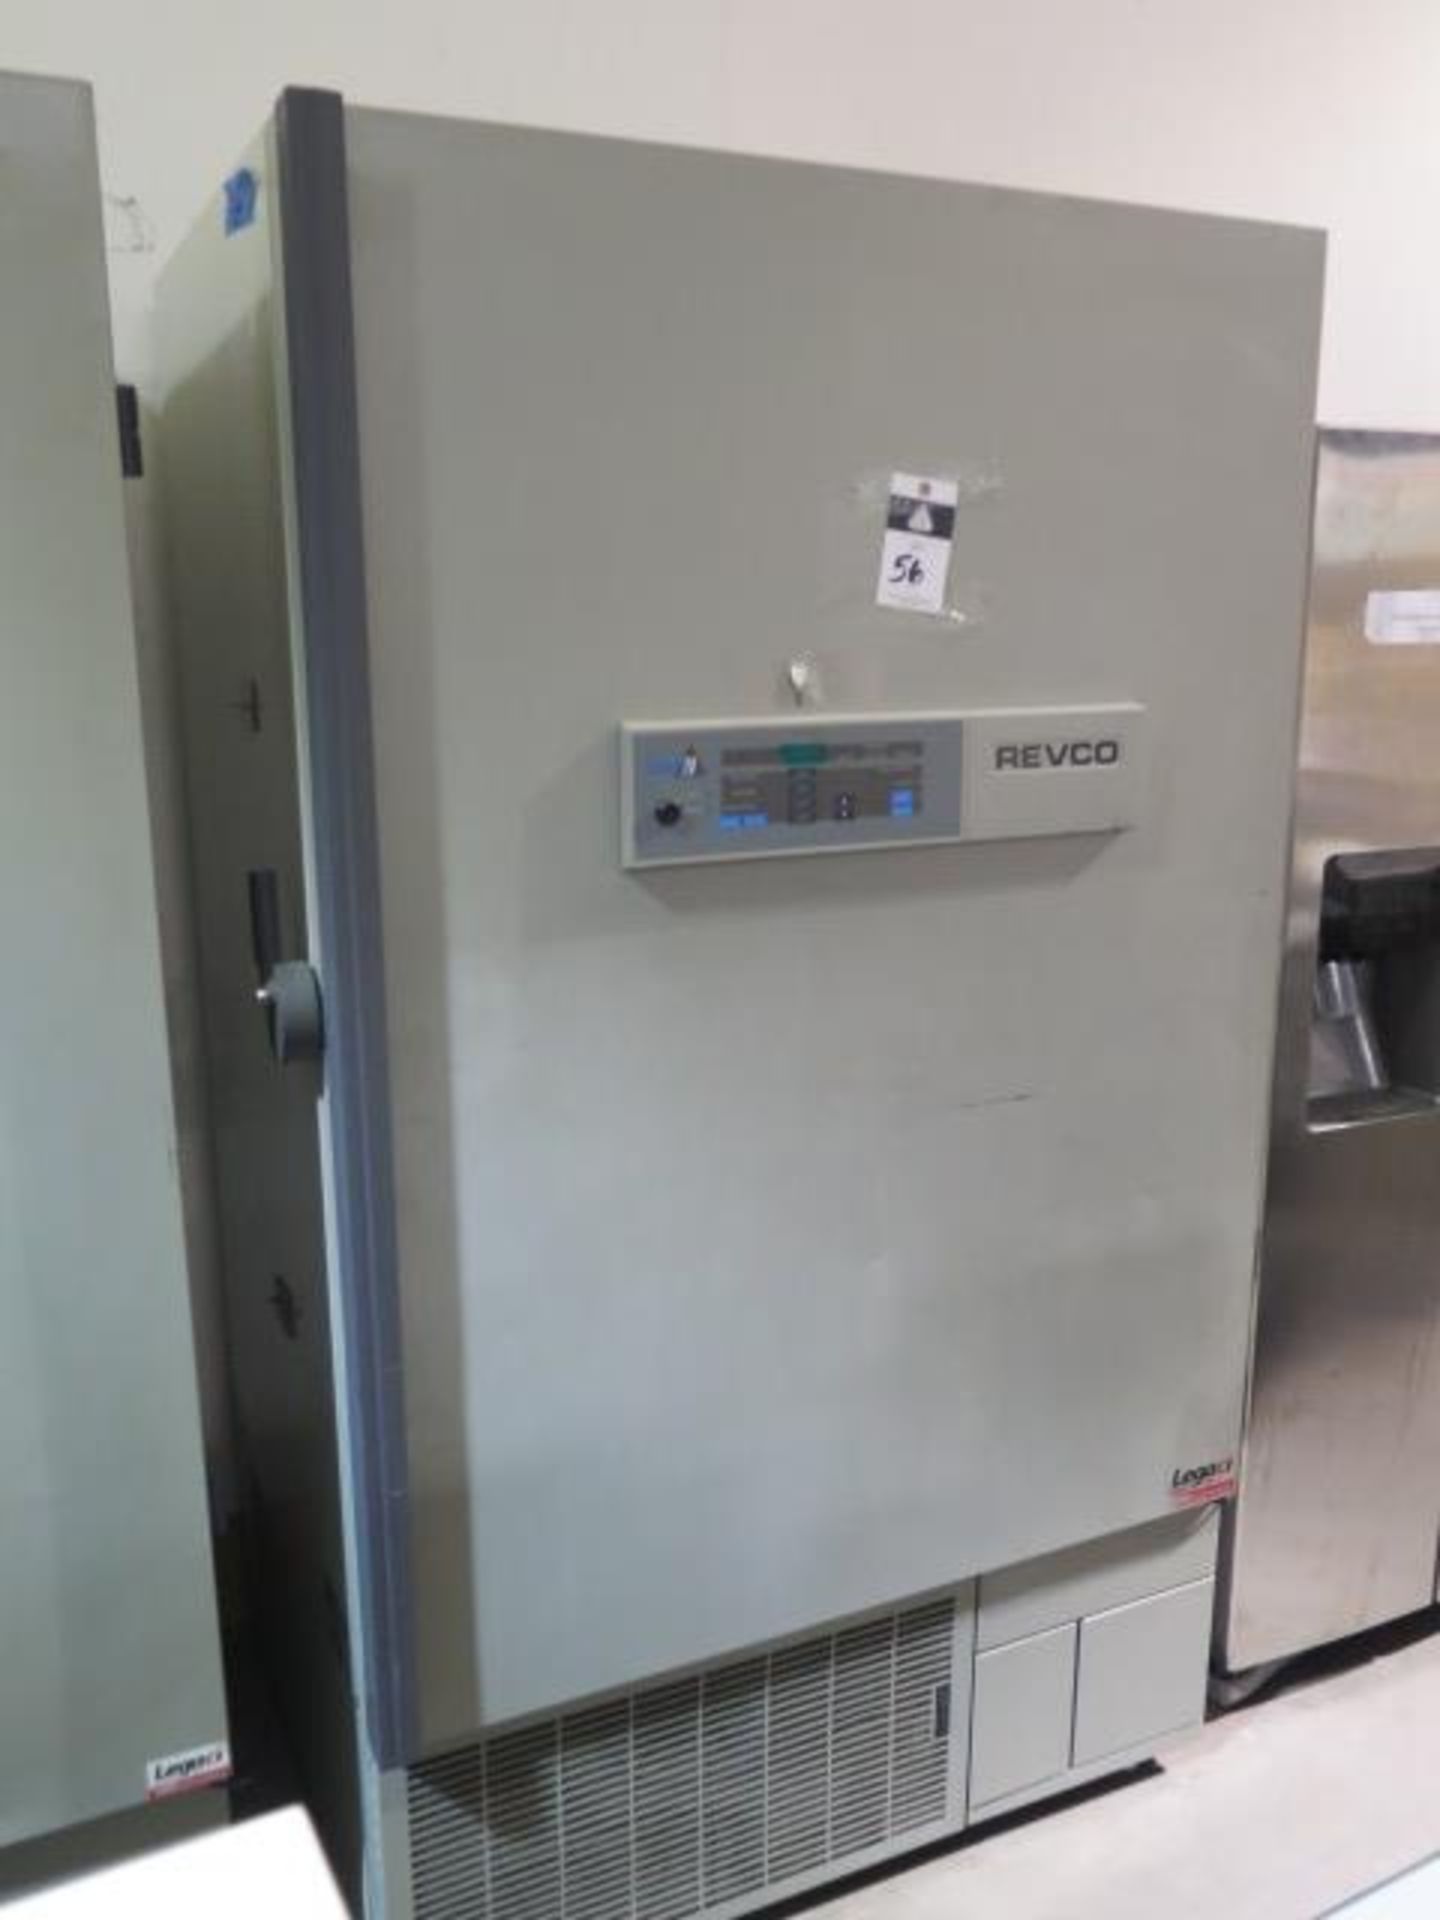 Revco ULT2586-9-A34 -80 Degree Lab Freezer (SOLD AS-IS - NO WARRANTY) - Image 3 of 9